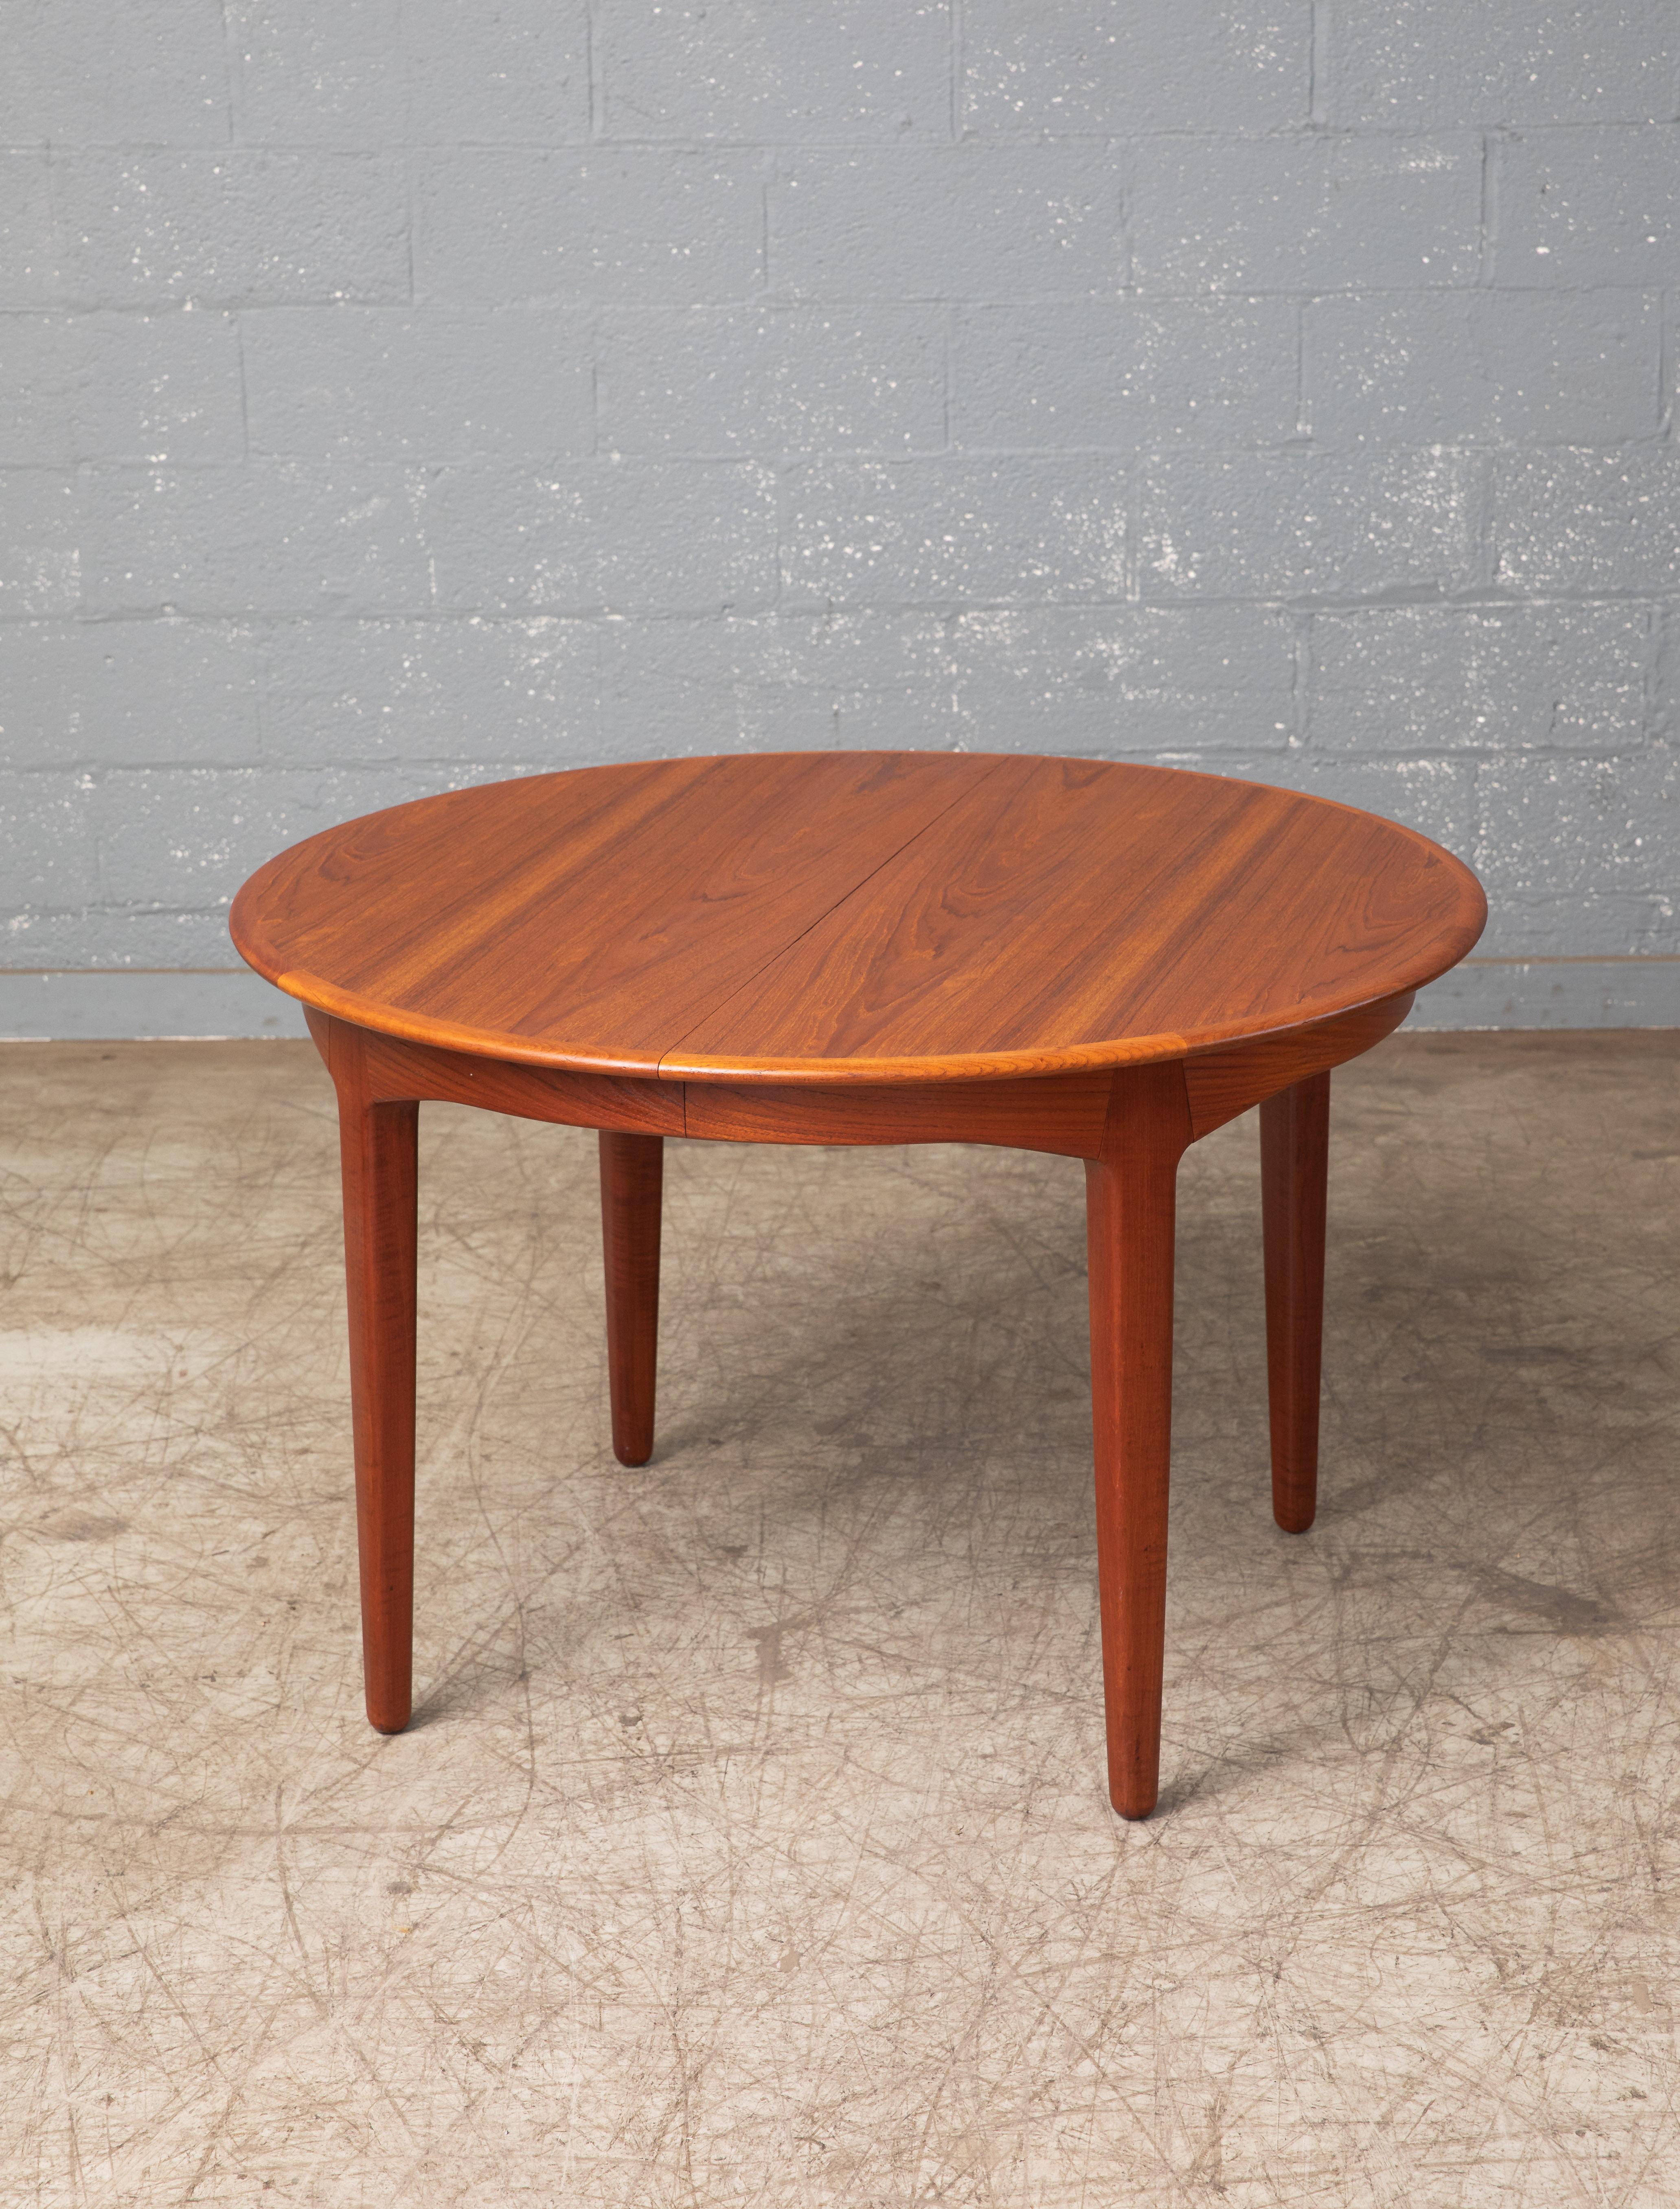 Beautiful round dining table in teak designed by renowned designer Henning Kjaernulf for Sorø Stolefabrik in 1962. The round table has a diameter of 45 inches and comfortable seats four people and comes with three extension leaves each measuring